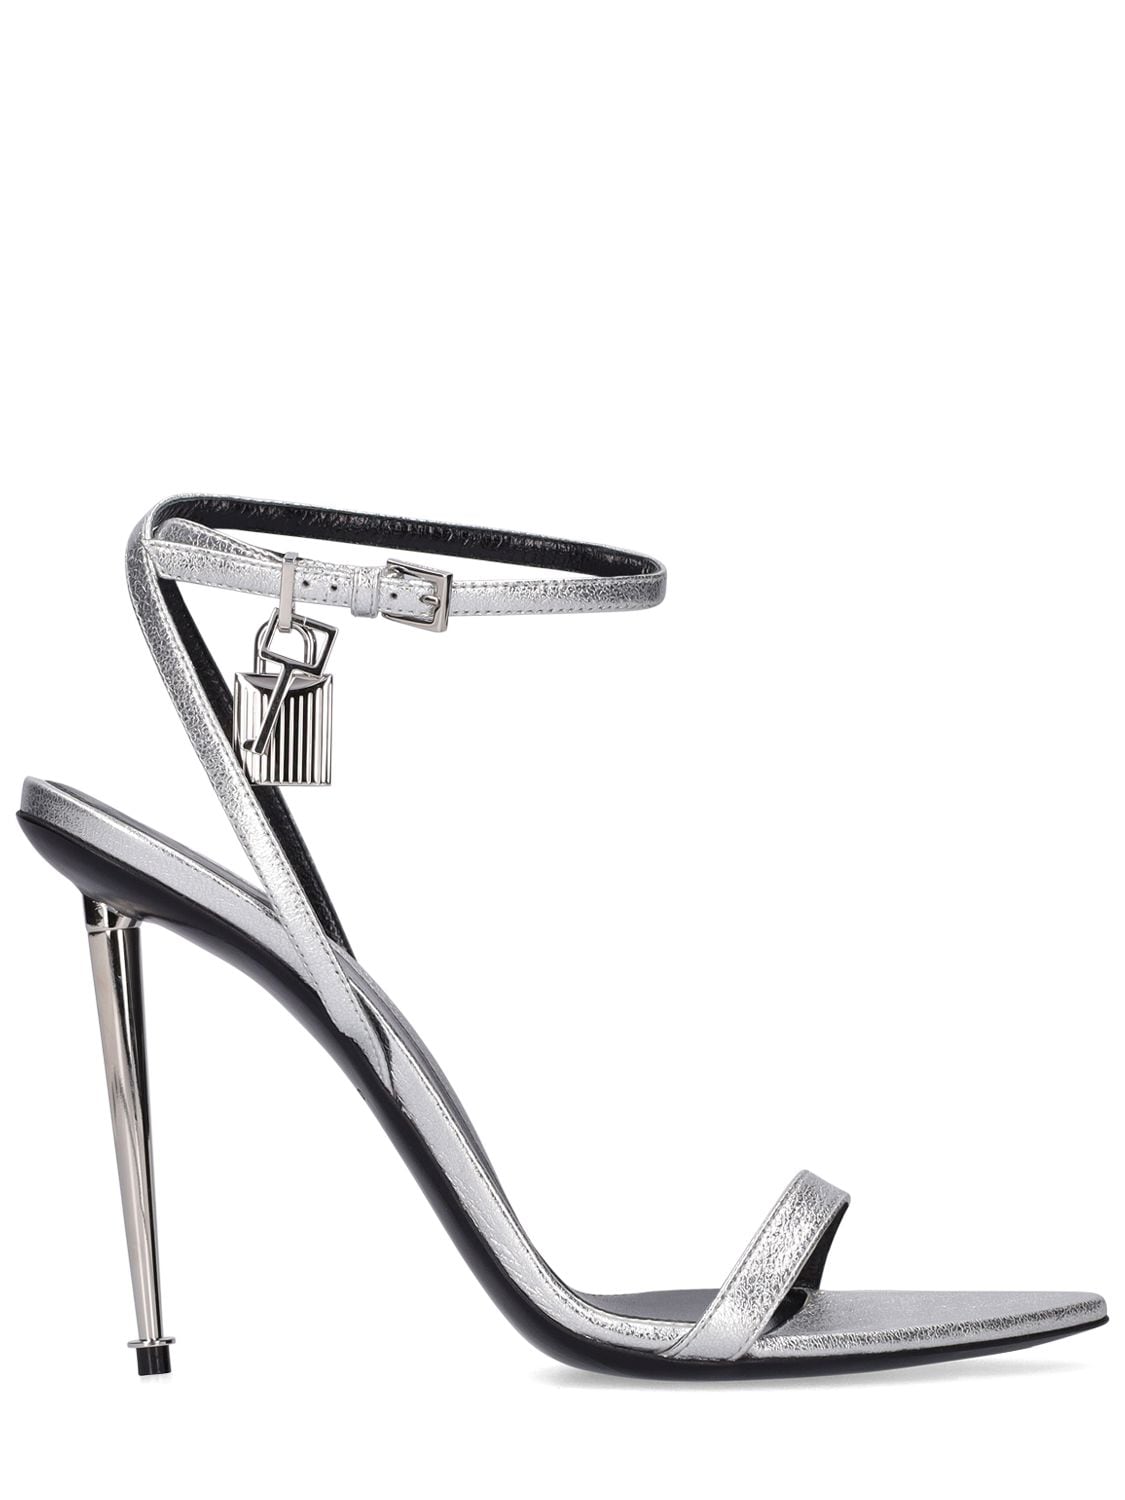 TOM FORD 105mm Padlock Laminated Leather Sandals